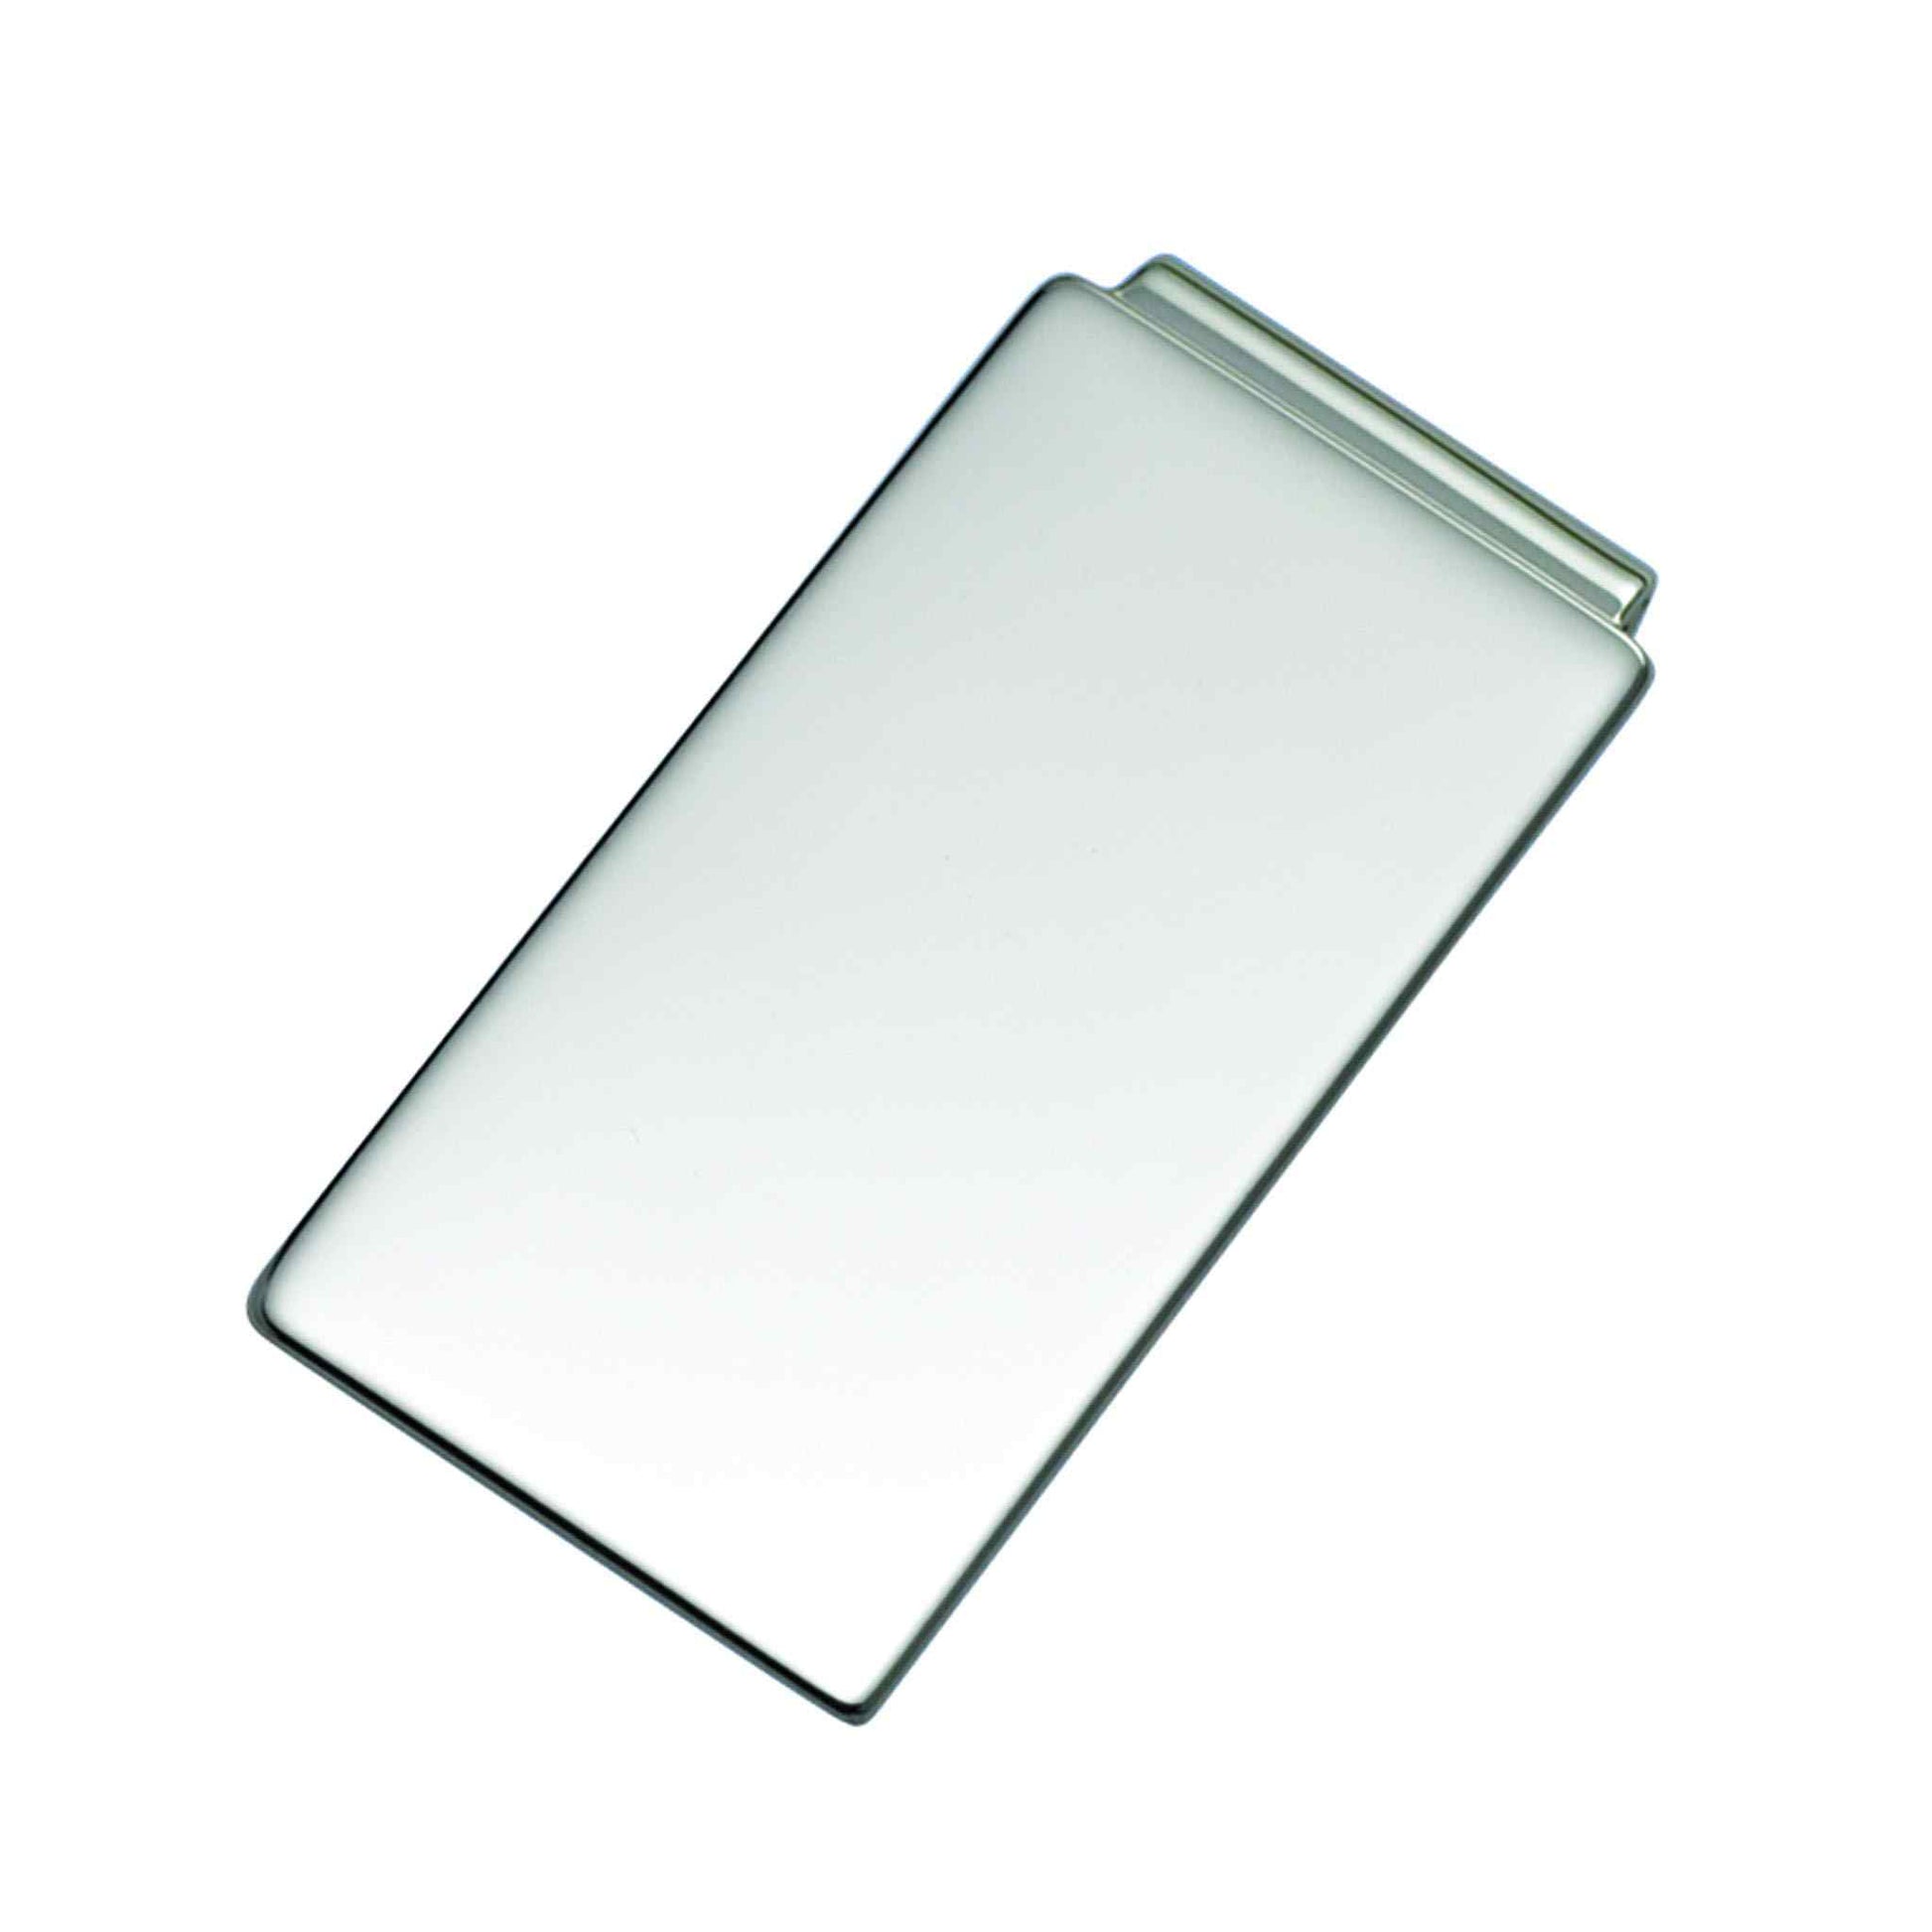 A sterling silver 7/8" hinged plain polished money clip displayed on a neutral white background.